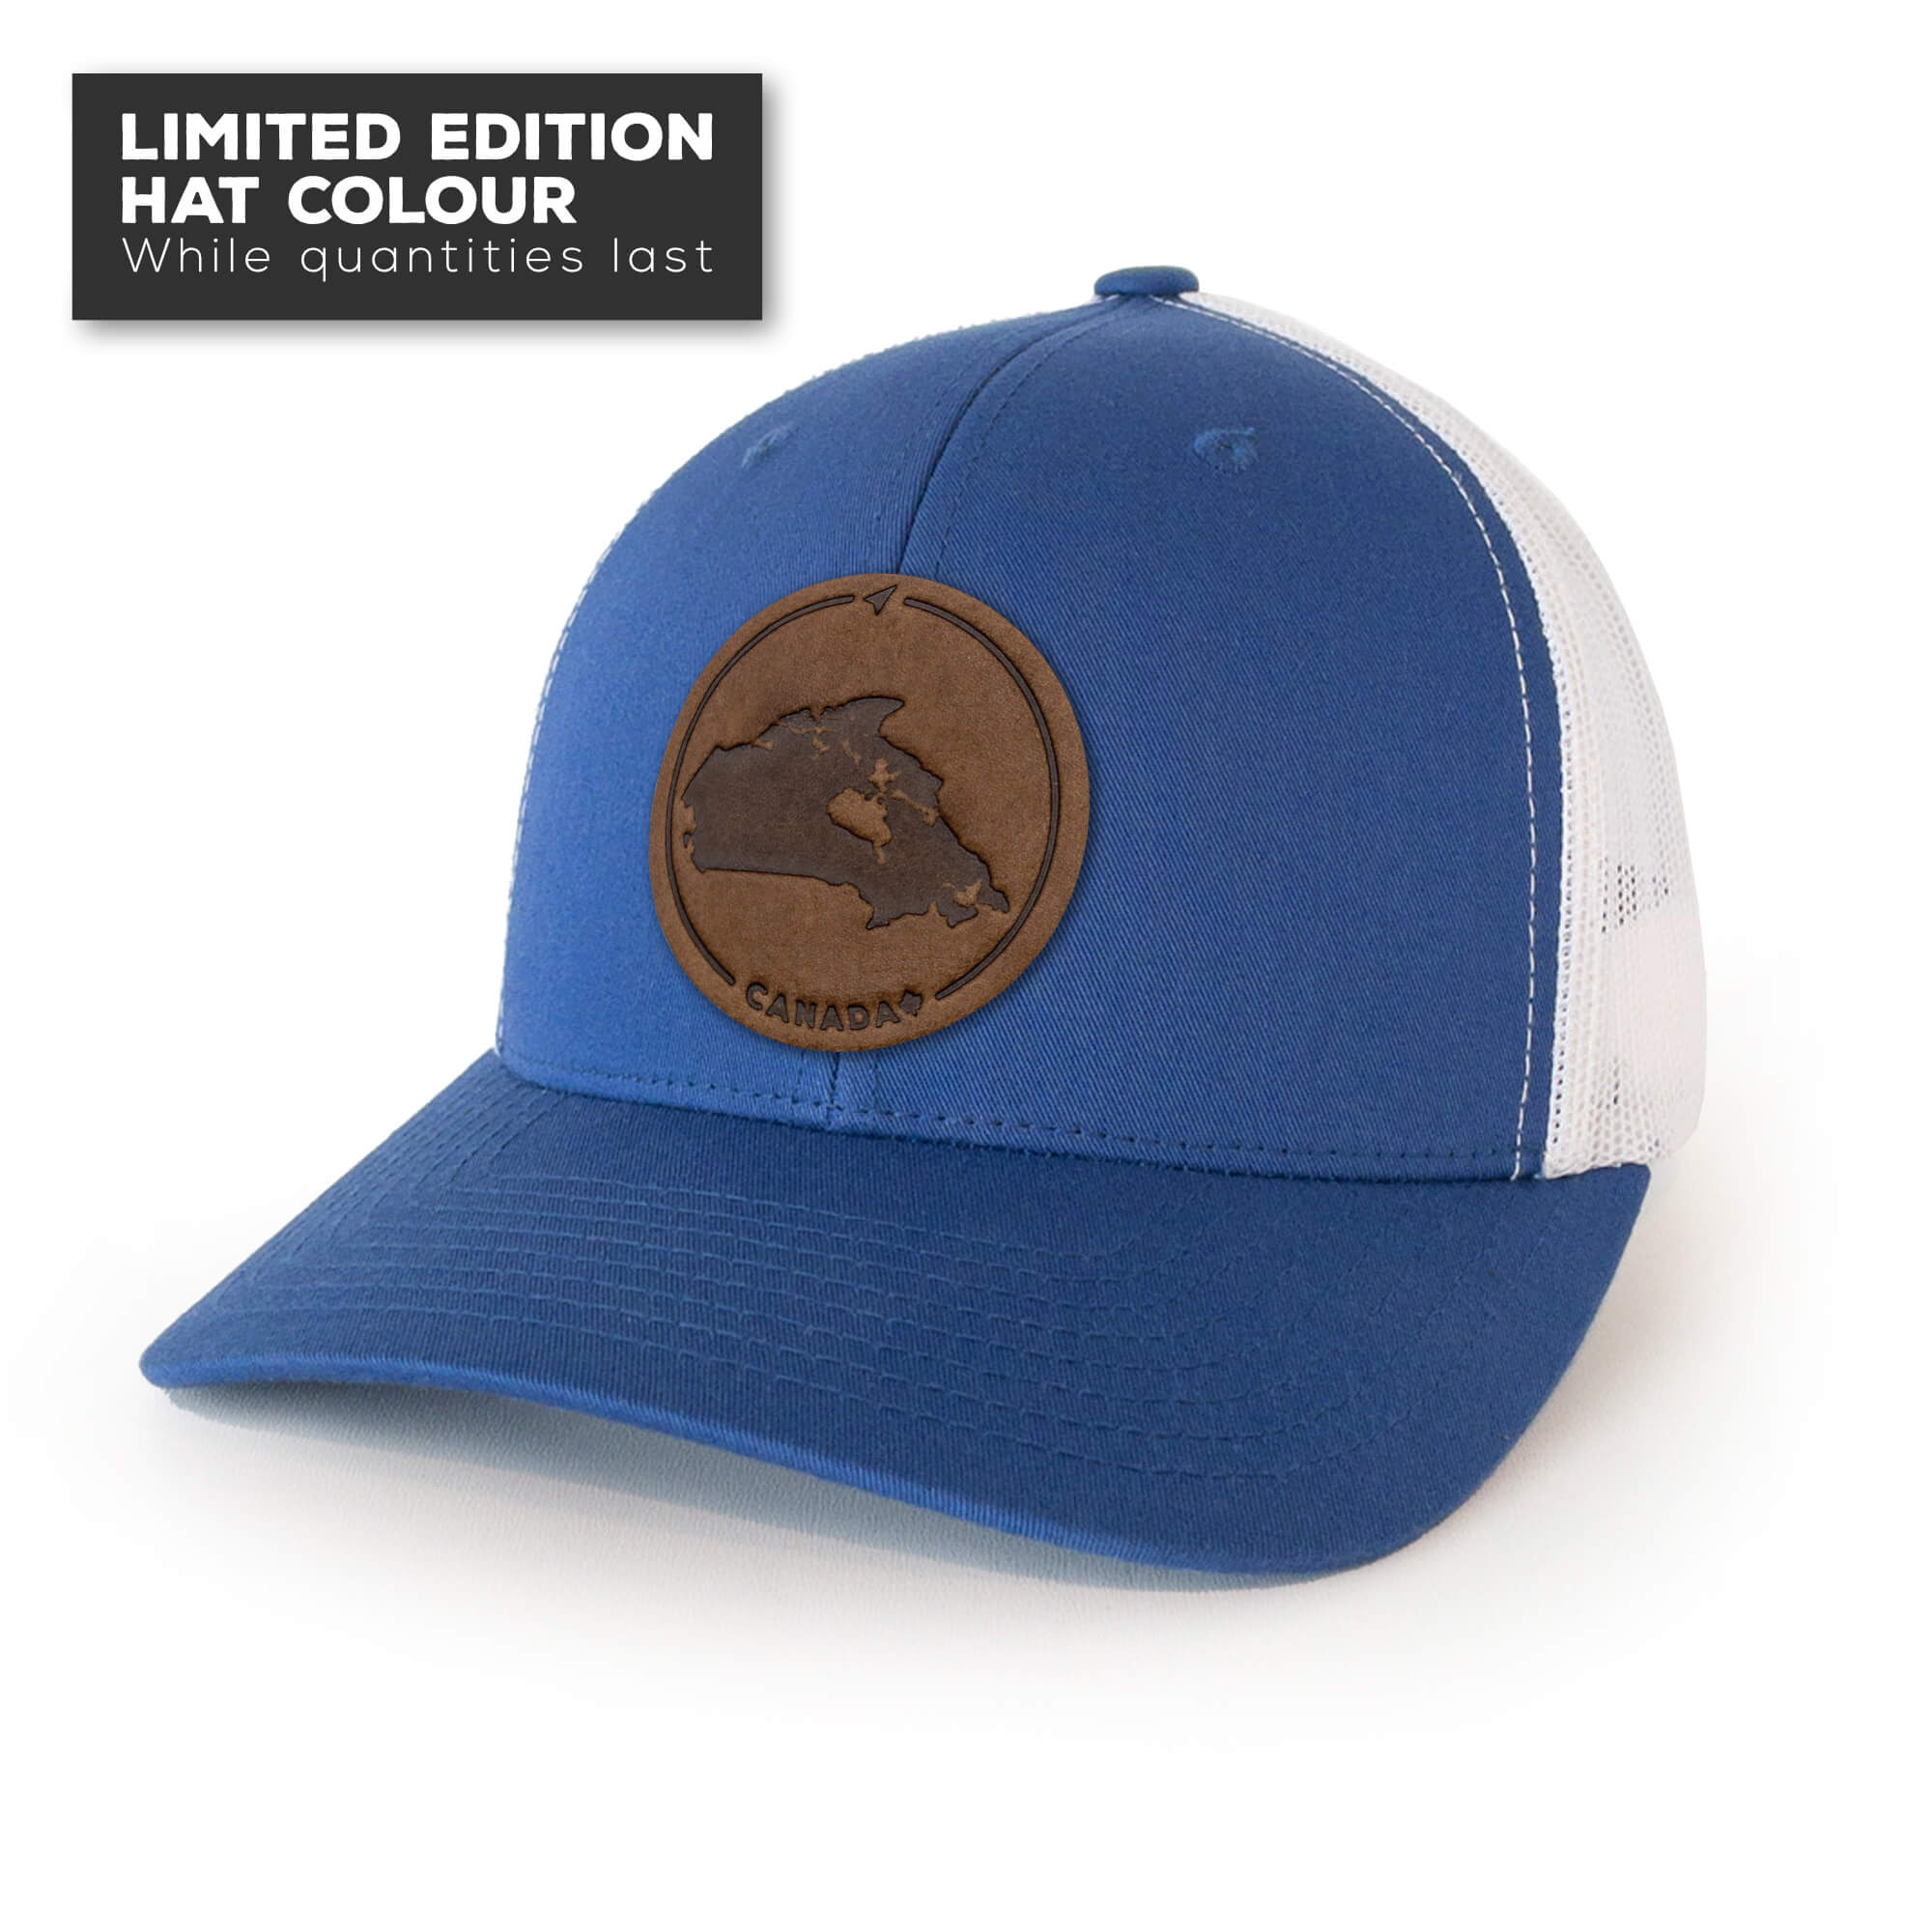 Royal Blue trucker hat with full-grain leather patch of Canada